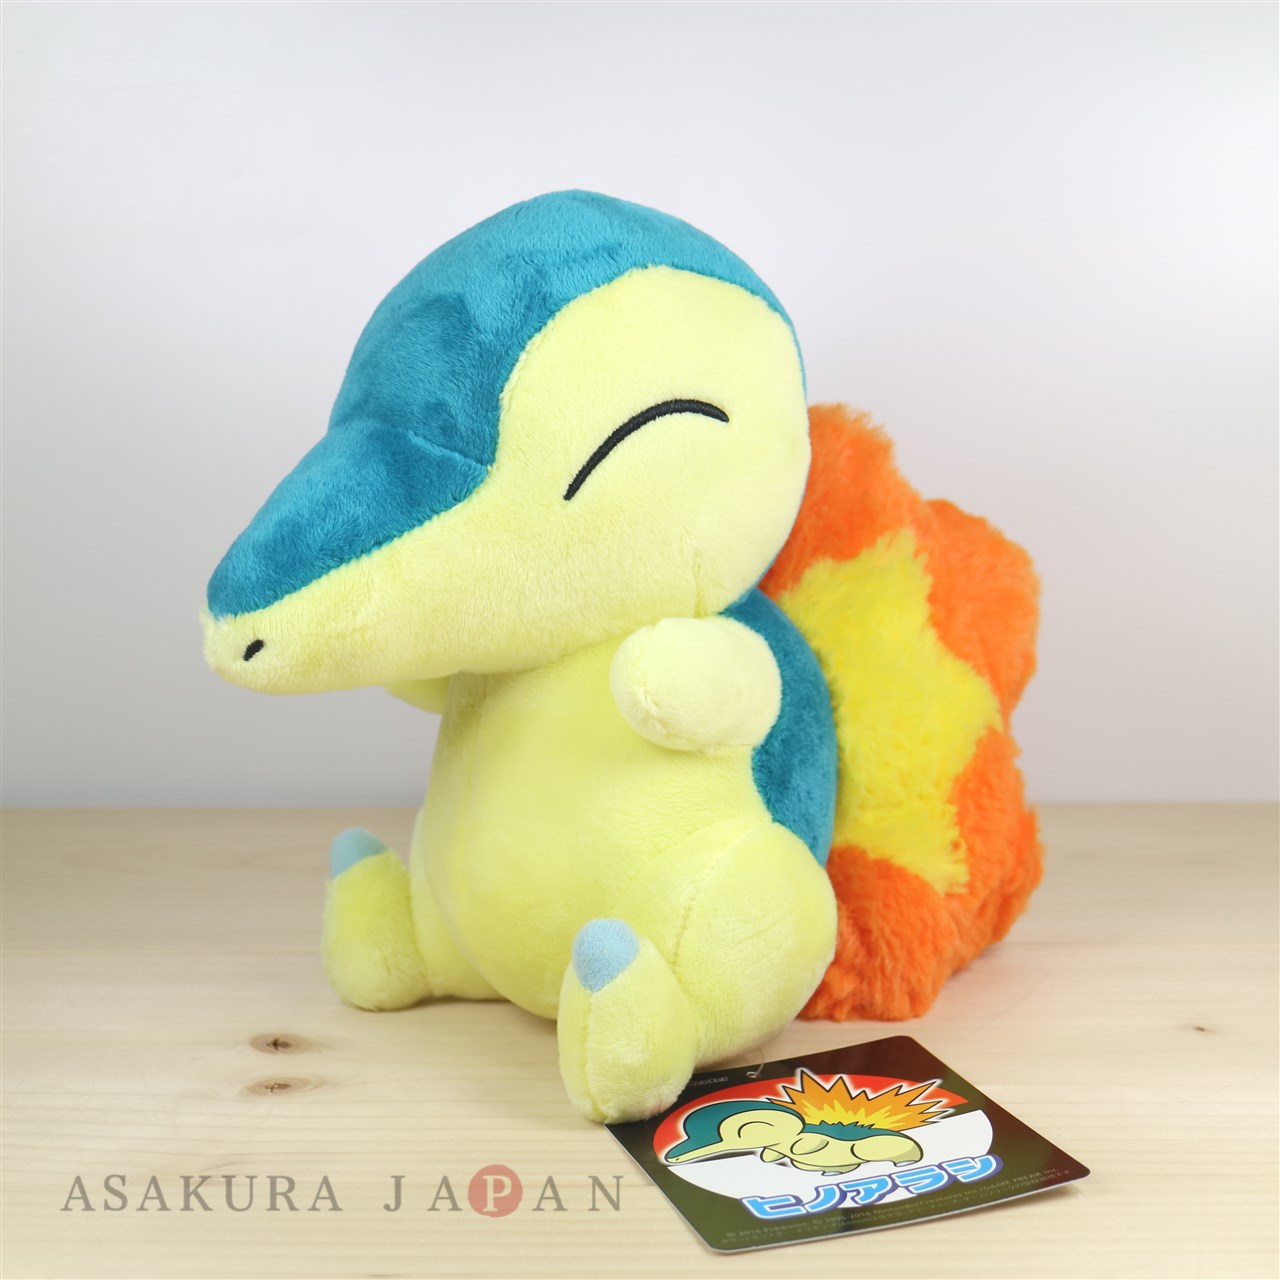 7" Cyndaquil # 155 Pokemon Plush Dolls Toys Stuffed Animals Fire Activated Ver 1 